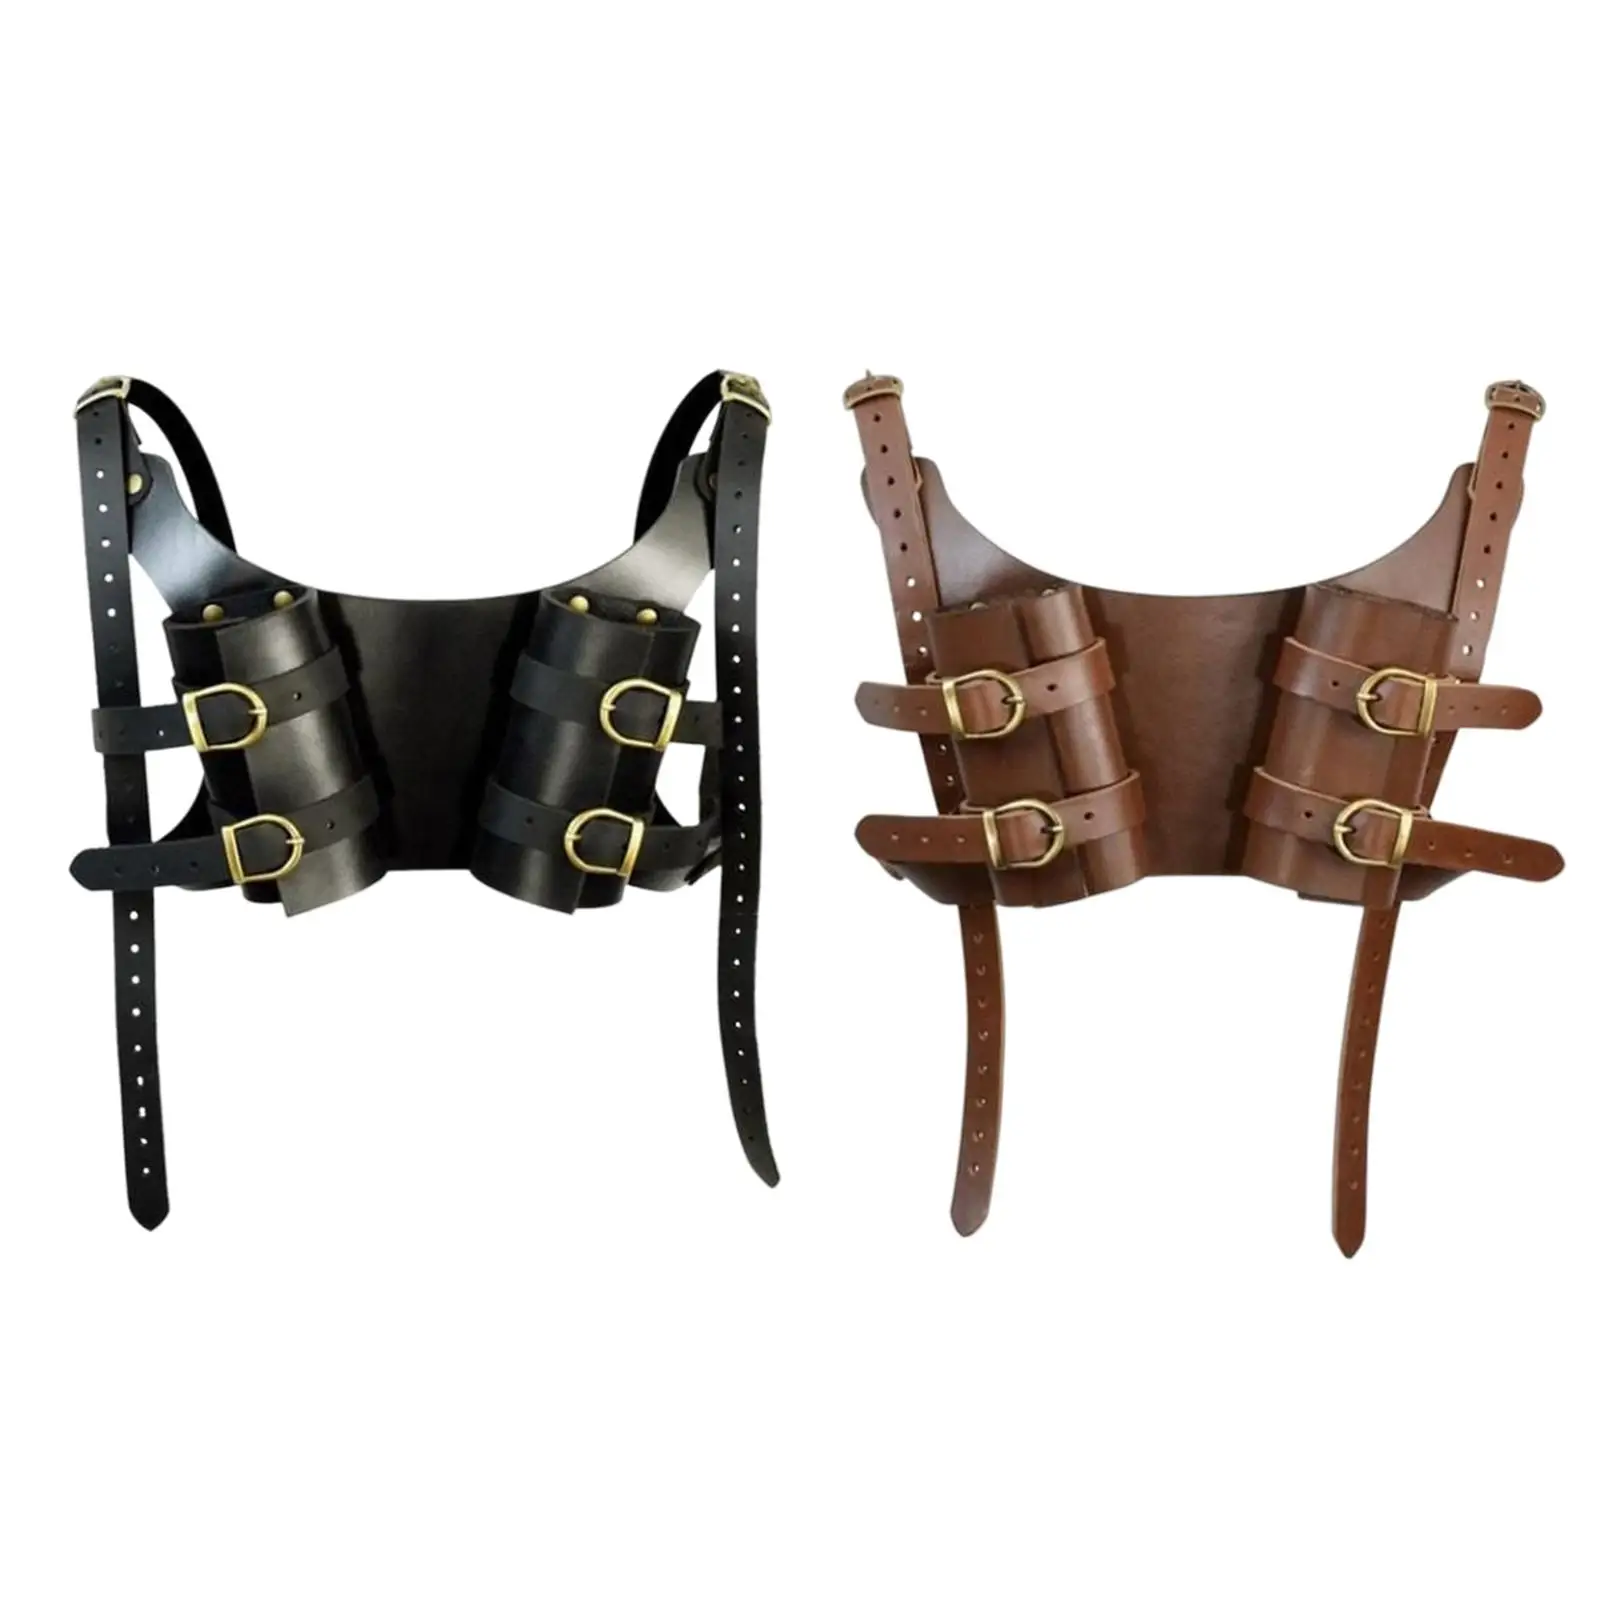 Double Medieval Shoulder Belt Cosplay Costume Sheath Bag Adjustable Props Sheath Scabbards for Knight Pirate Cosplay